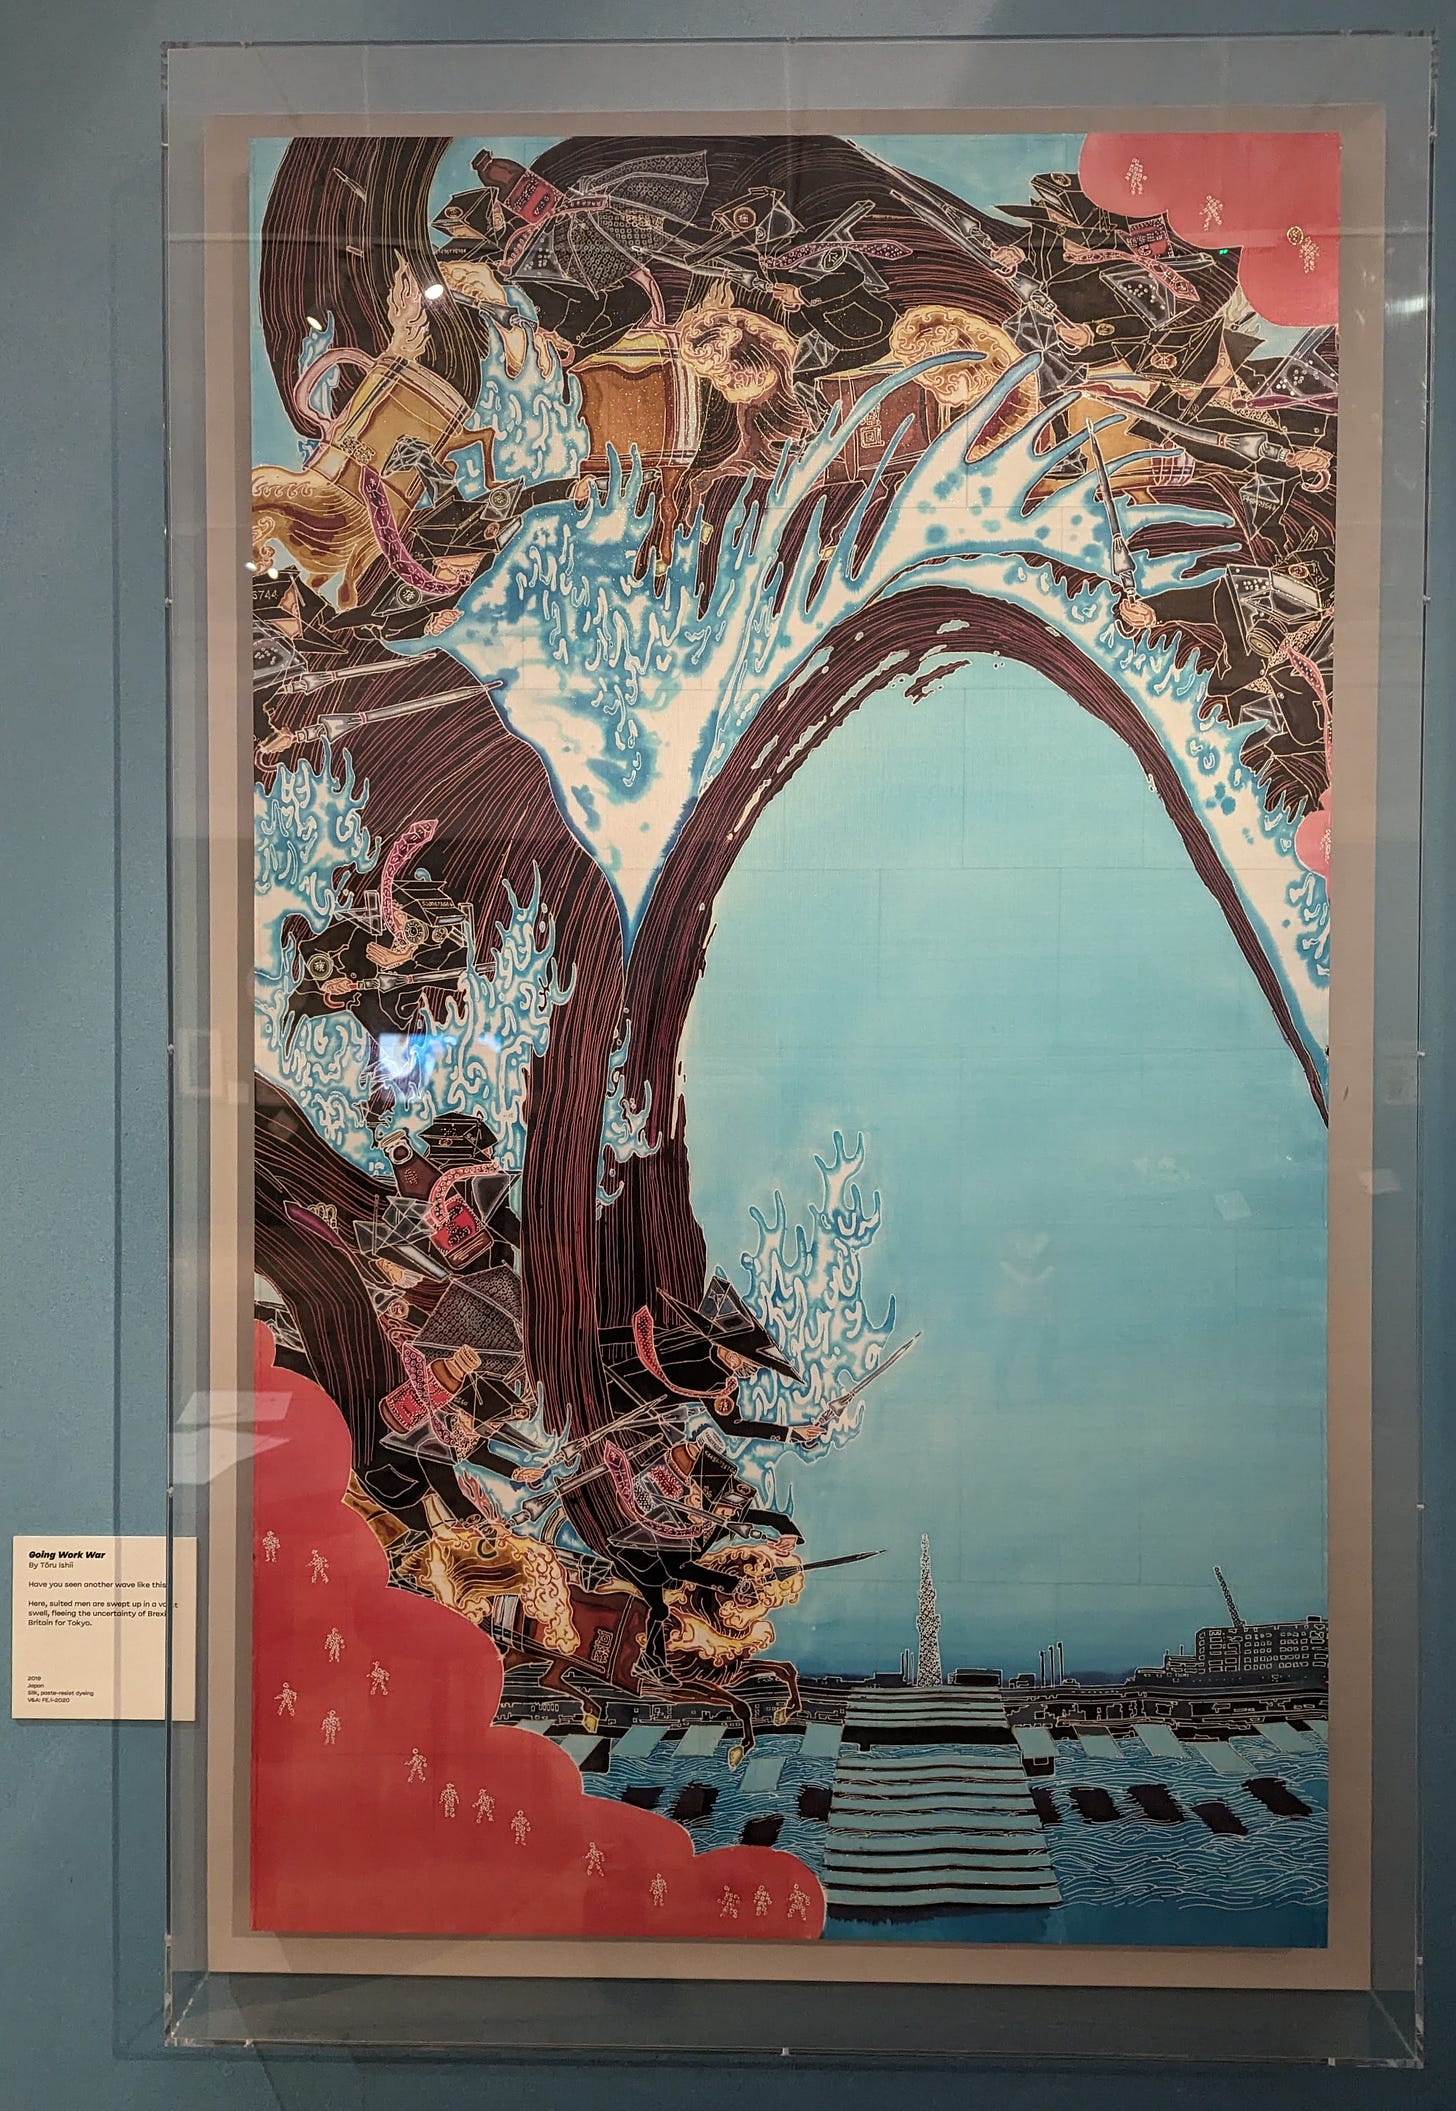 Reminiscent of The Great Wave, 'Going Work War', yuzen-dyed silk with sheet mirror backing mounted on an aluminium panel